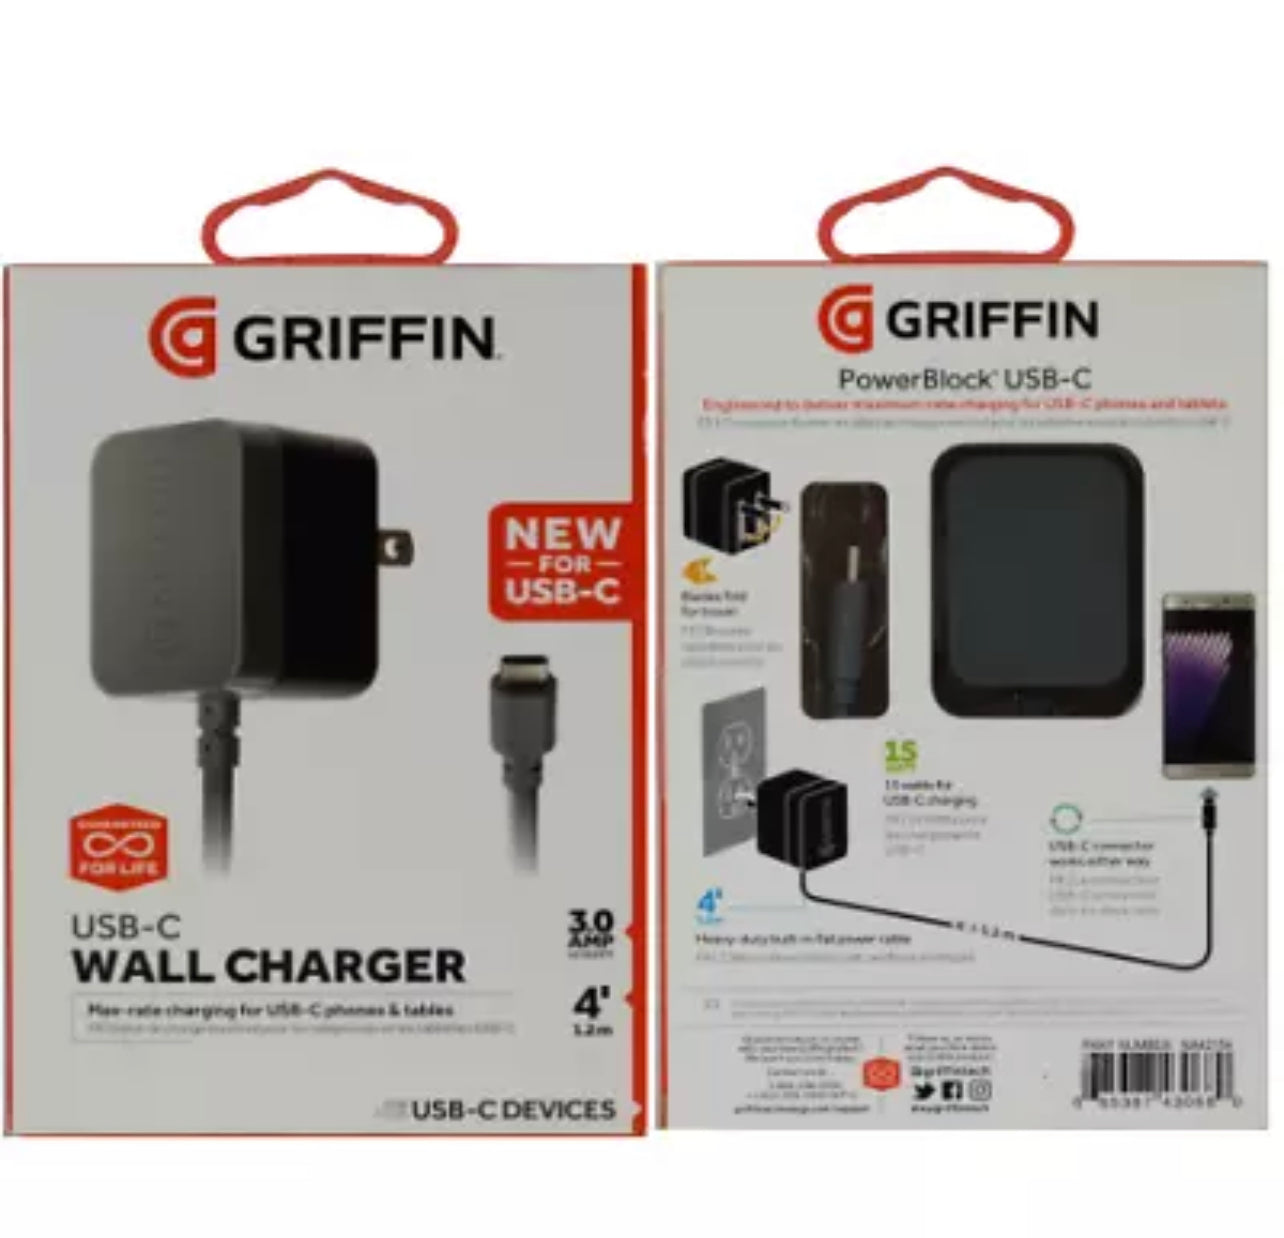 Griffin Powerblock Wall Charger 3.0 Amp with 4 Ft. USB-C Cable